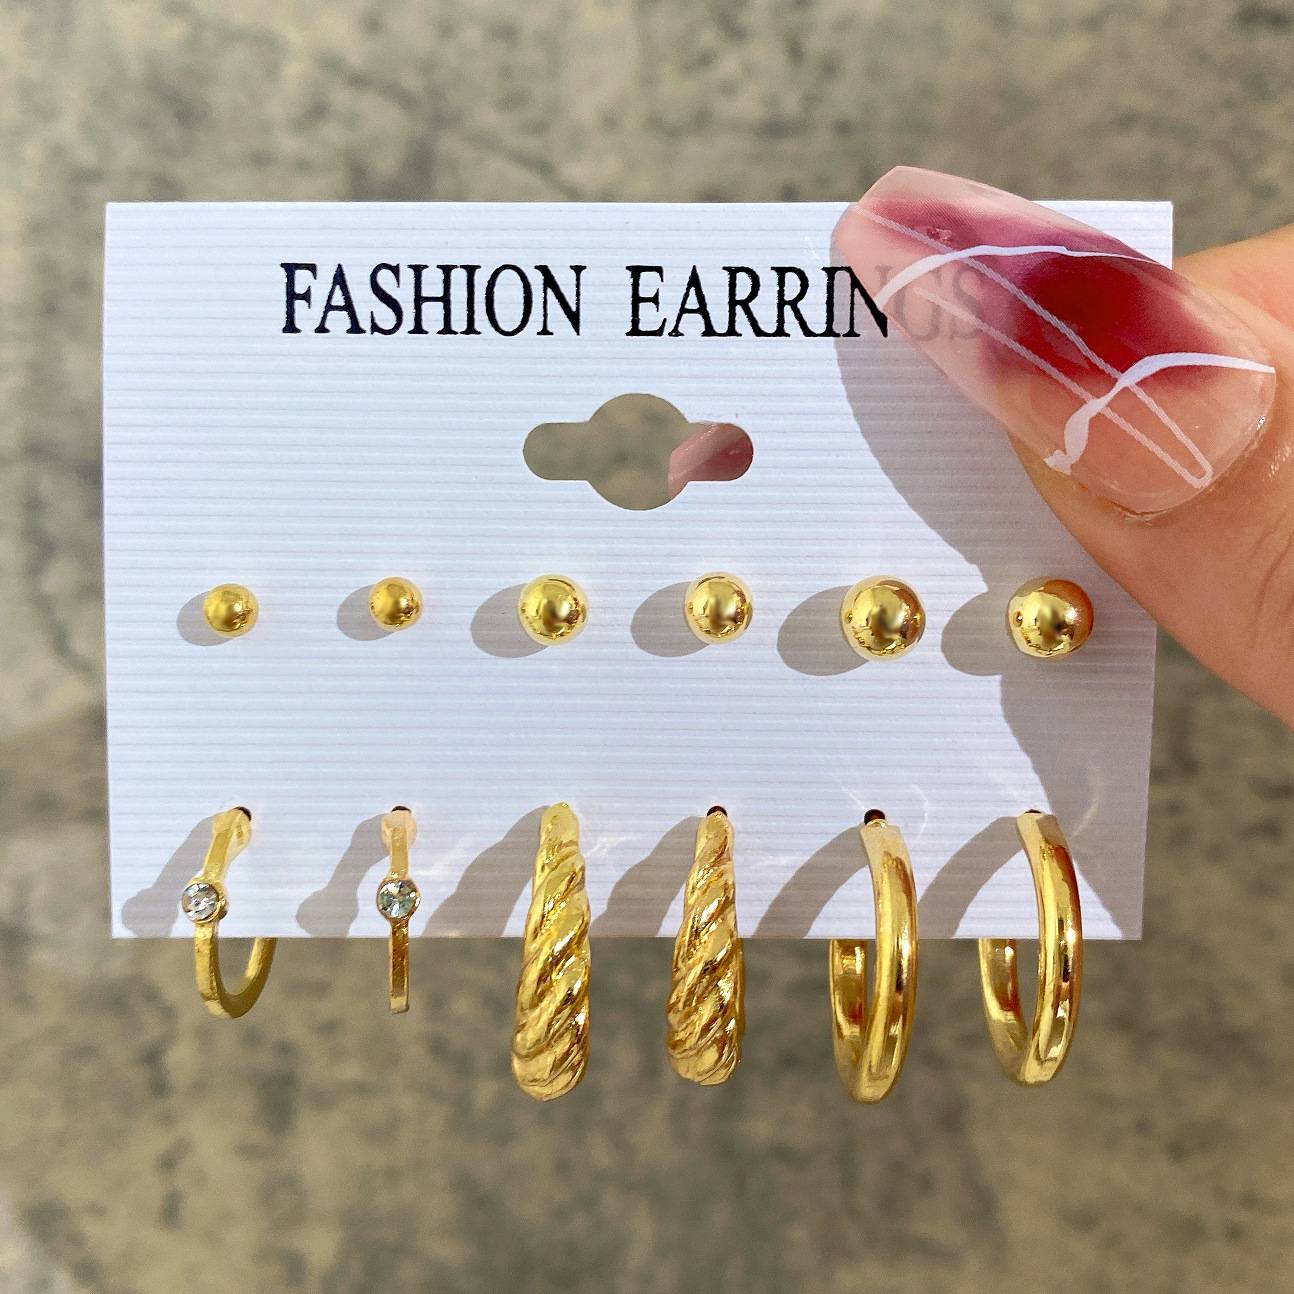 53434 6 Pairs Gold Plated Stud Earrings Set Vintage Rhinestone Decor Twist Hoop Earrings For Woman 2022 Fashion Jewelry Gifts